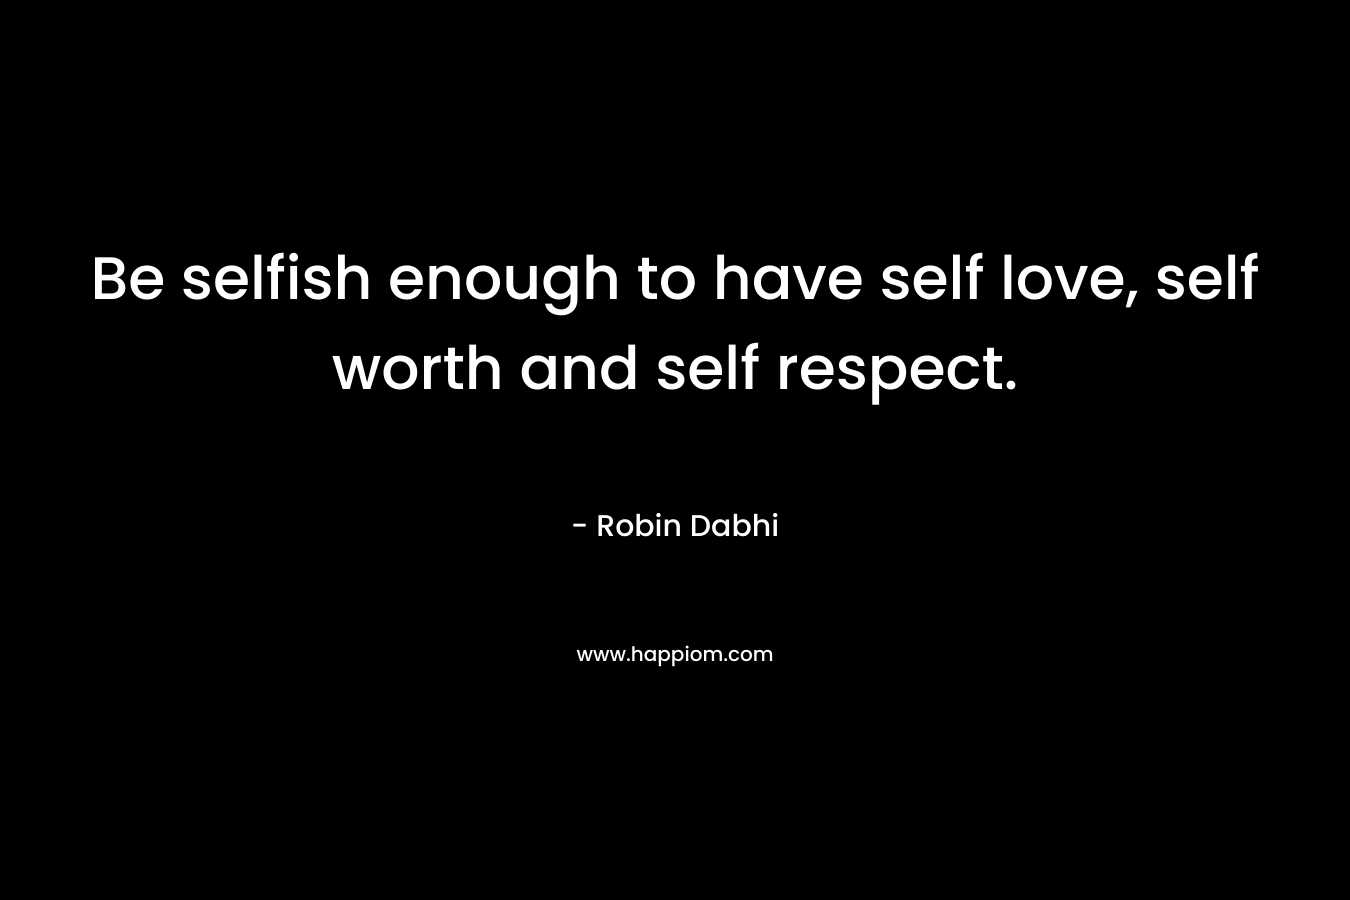 Be selfish enough to have self love, self worth and self respect.